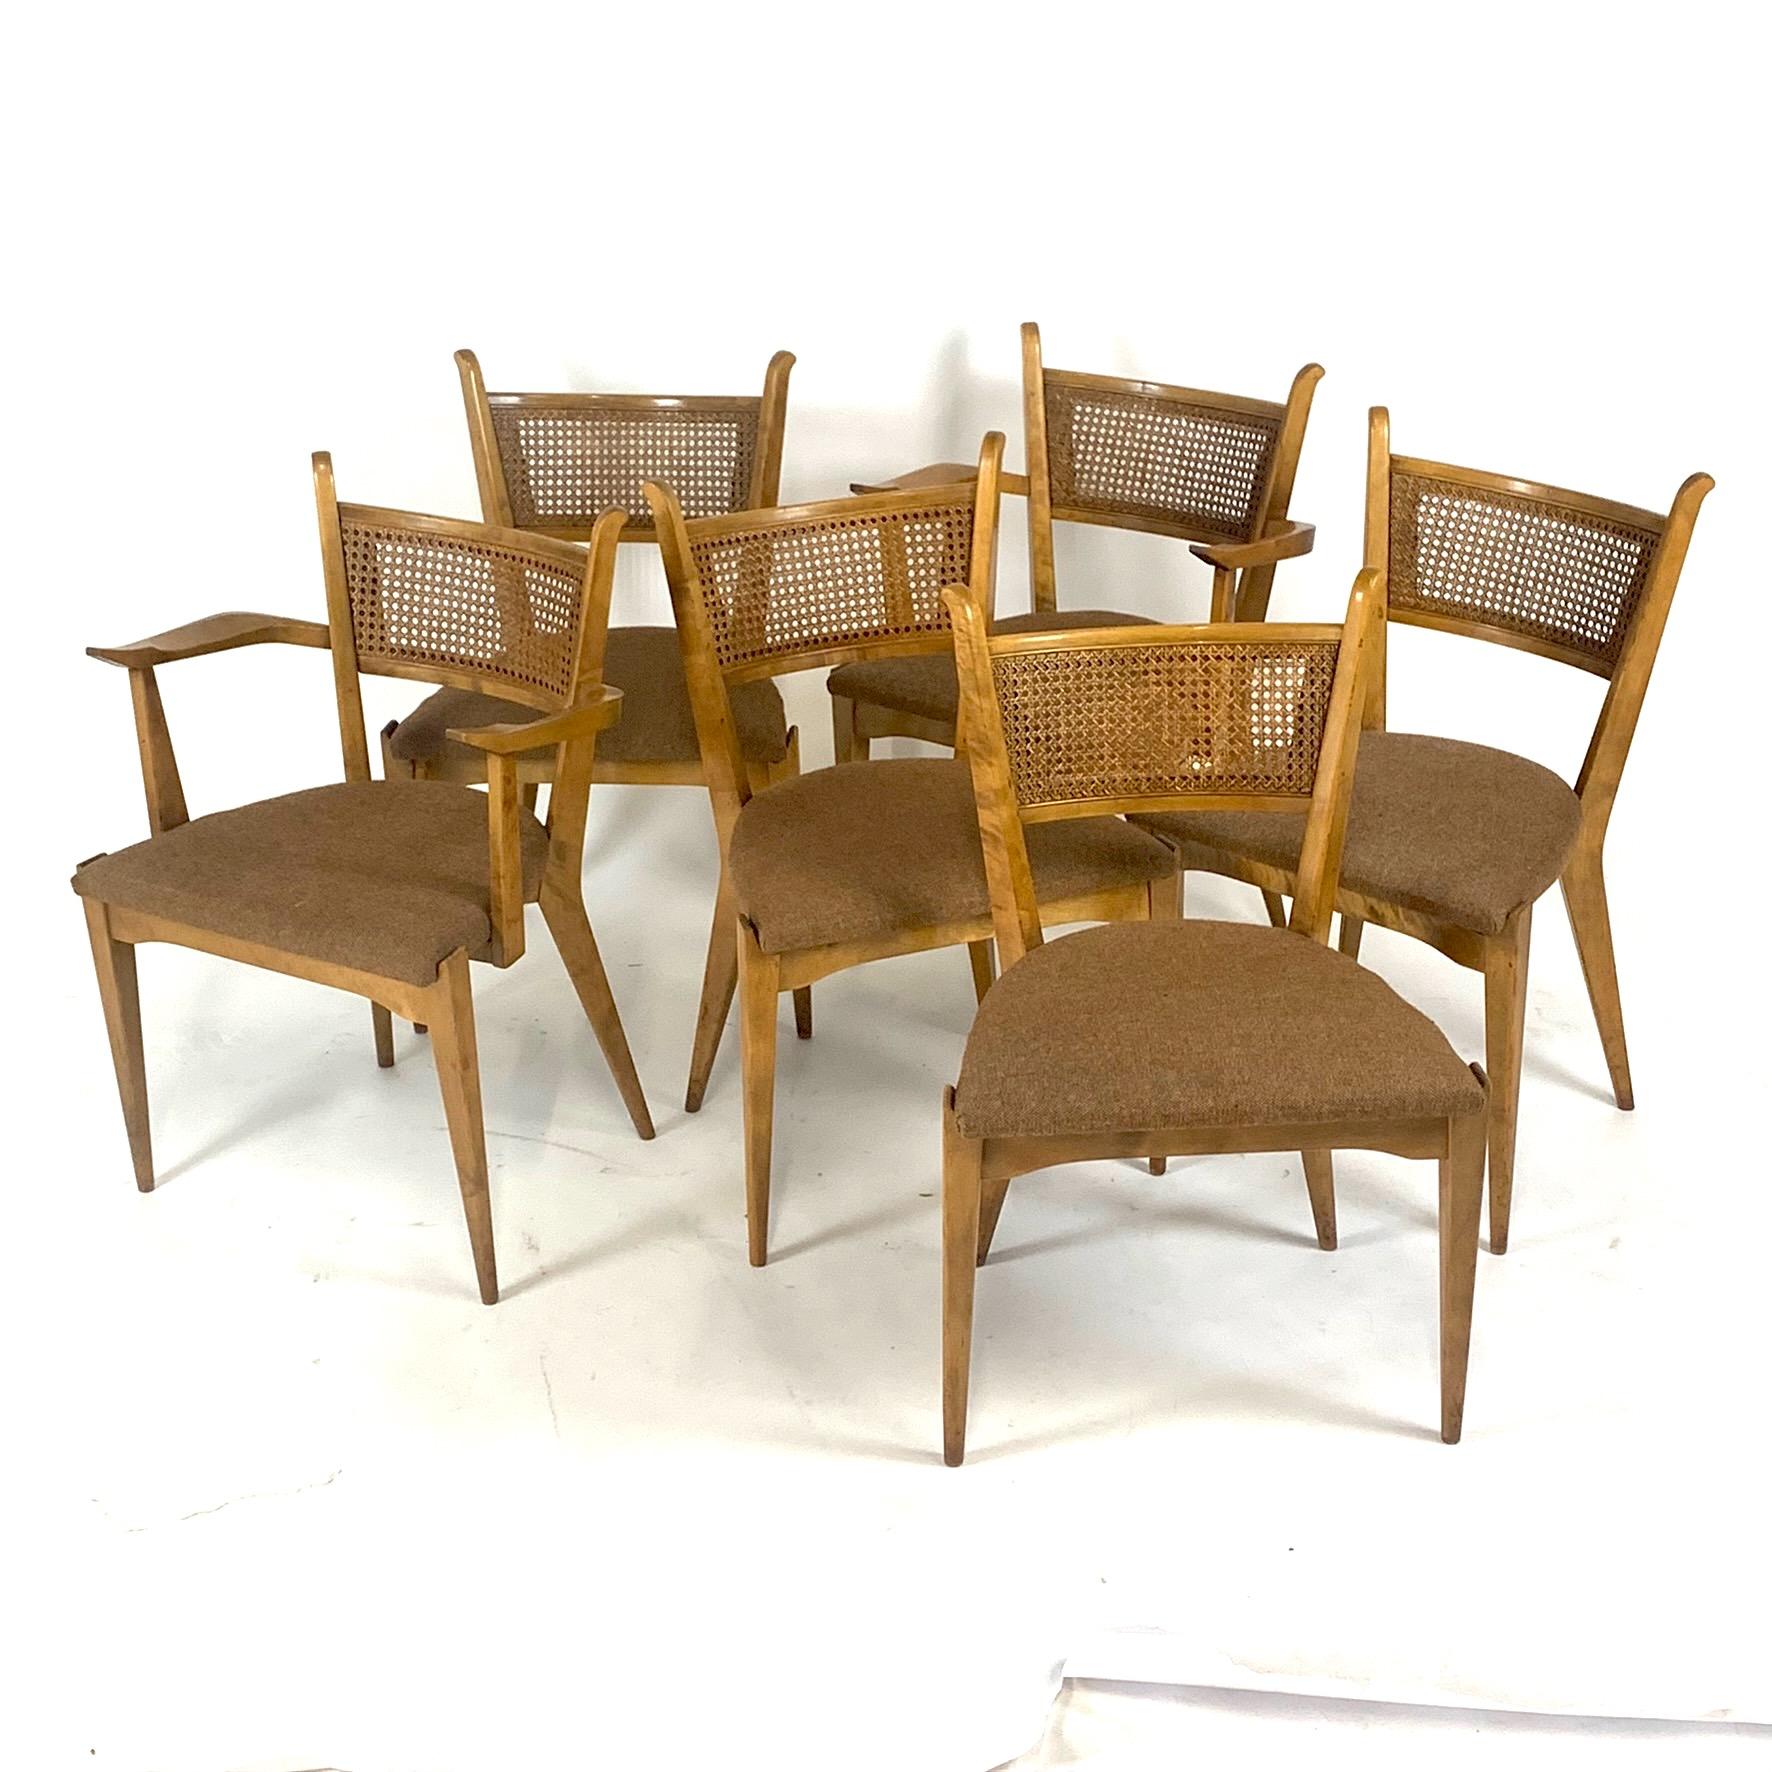 Rare Set of 6 Swedish Modern Cane Back Sculptural Dining Chairs by Edmond Spence 3